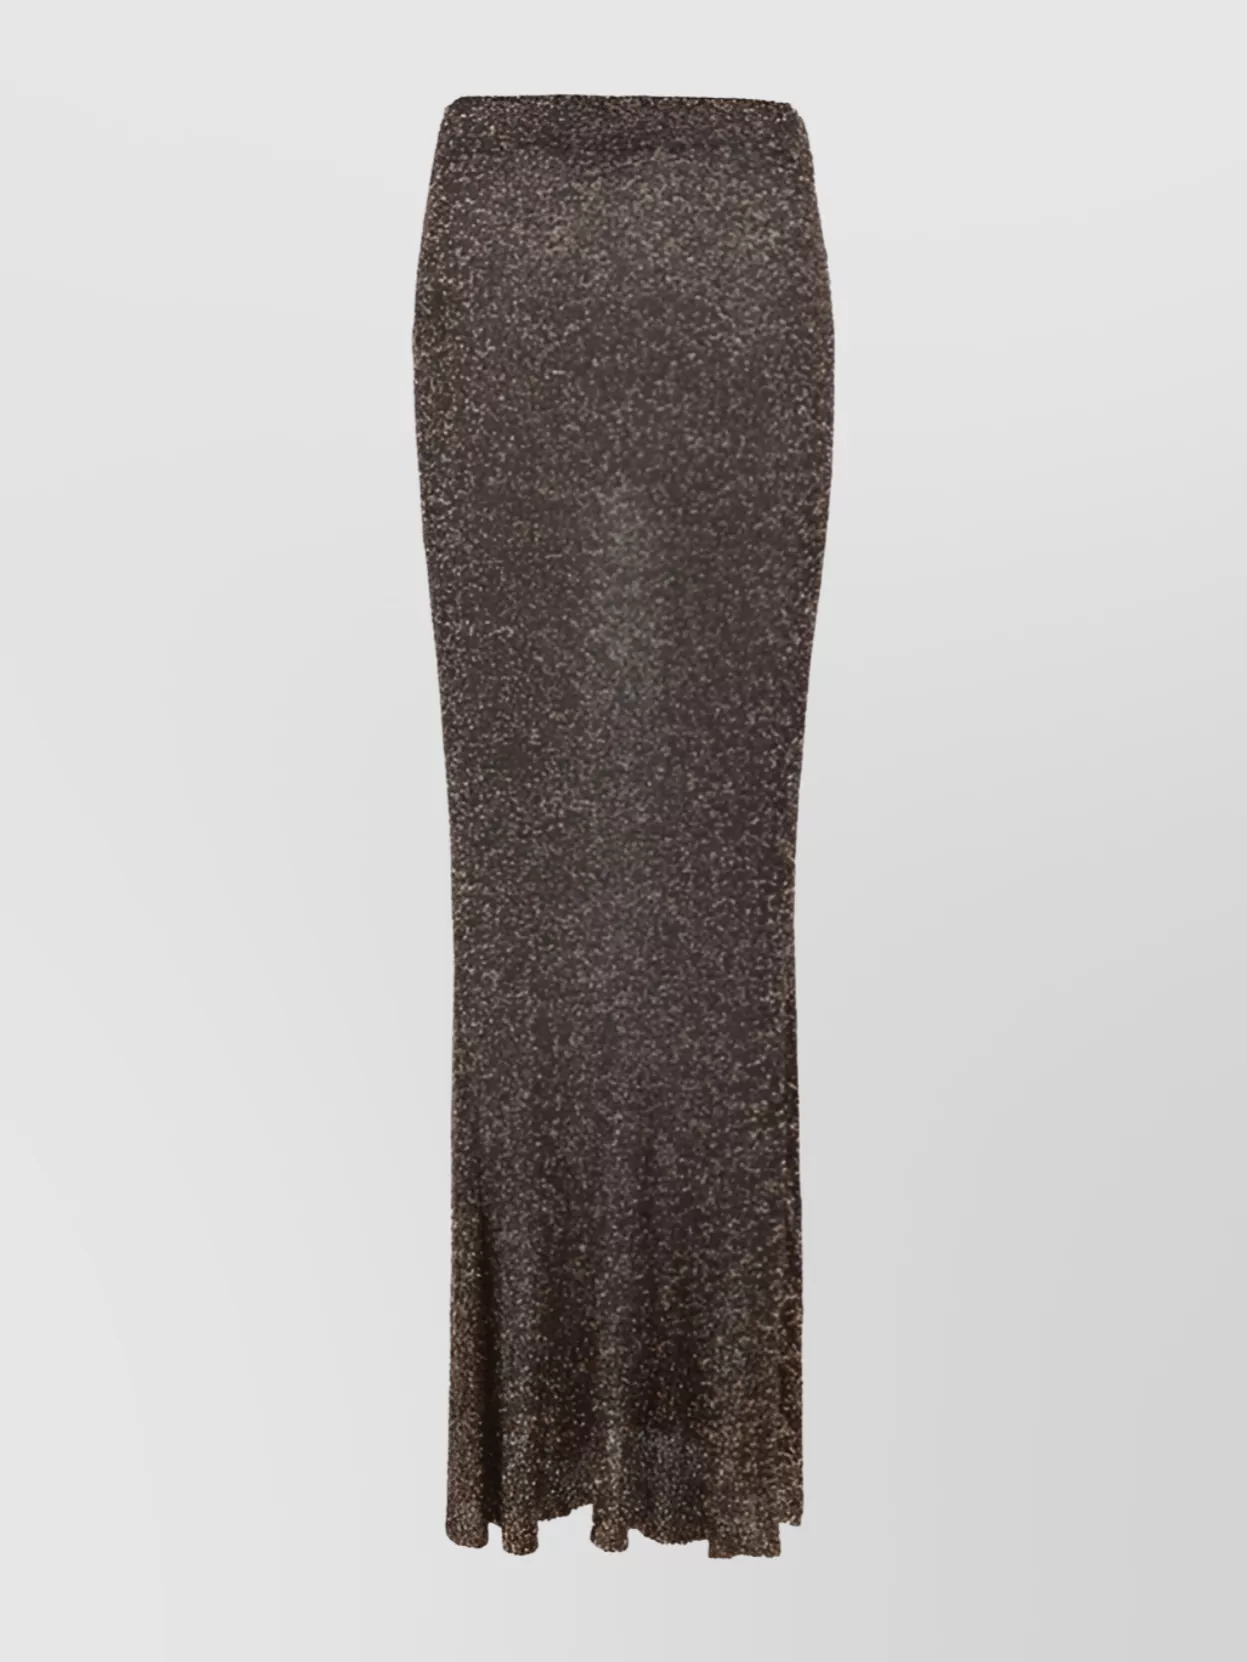 Balenciaga Sequined Stretch-knit Maxi Skirt In Brown & Gold